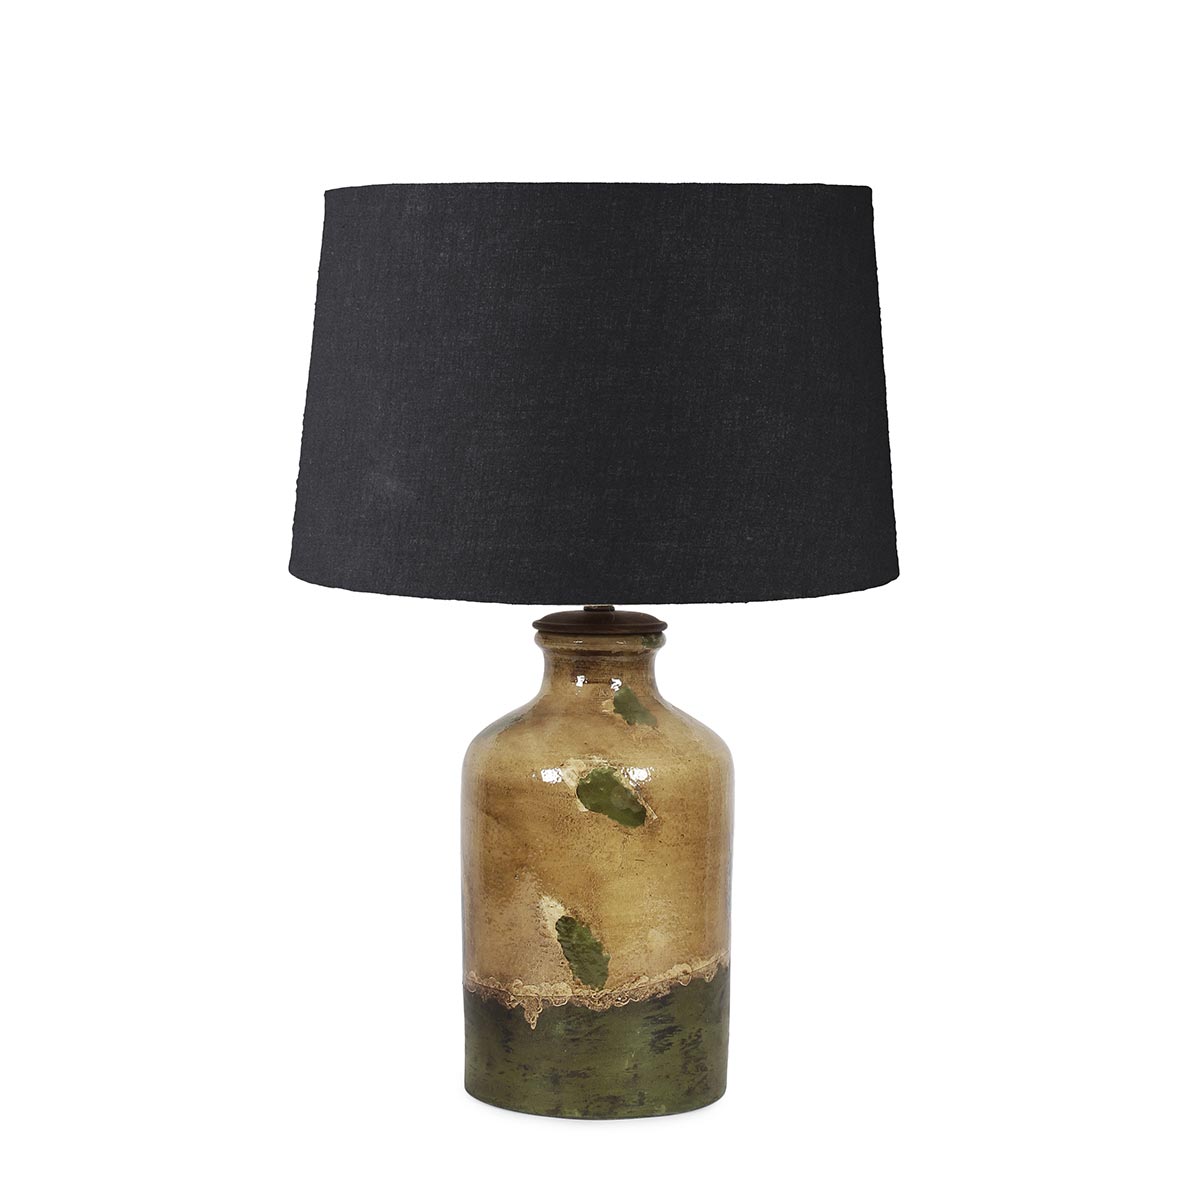 bedroom side table lamps